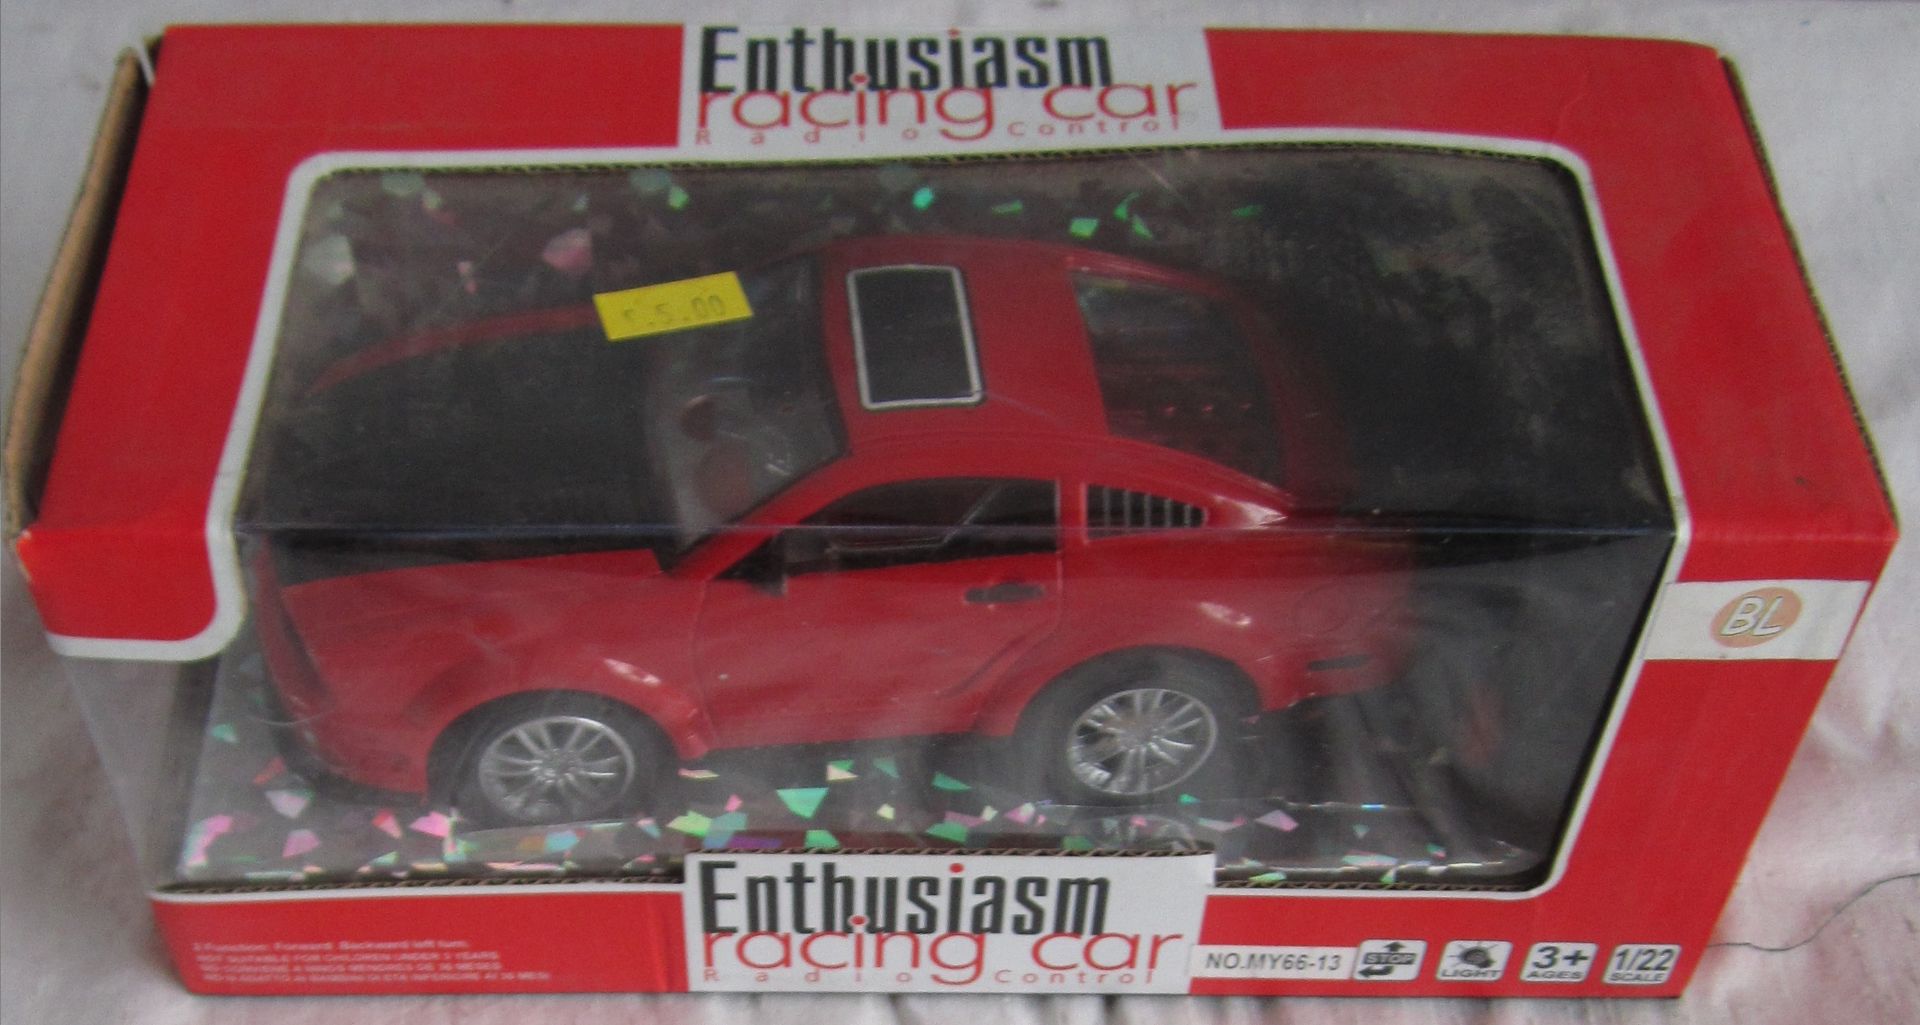 3 x Enthusiasm Radio Controlled Racing Car, Red/White (Delivery Available) 7x4x2''